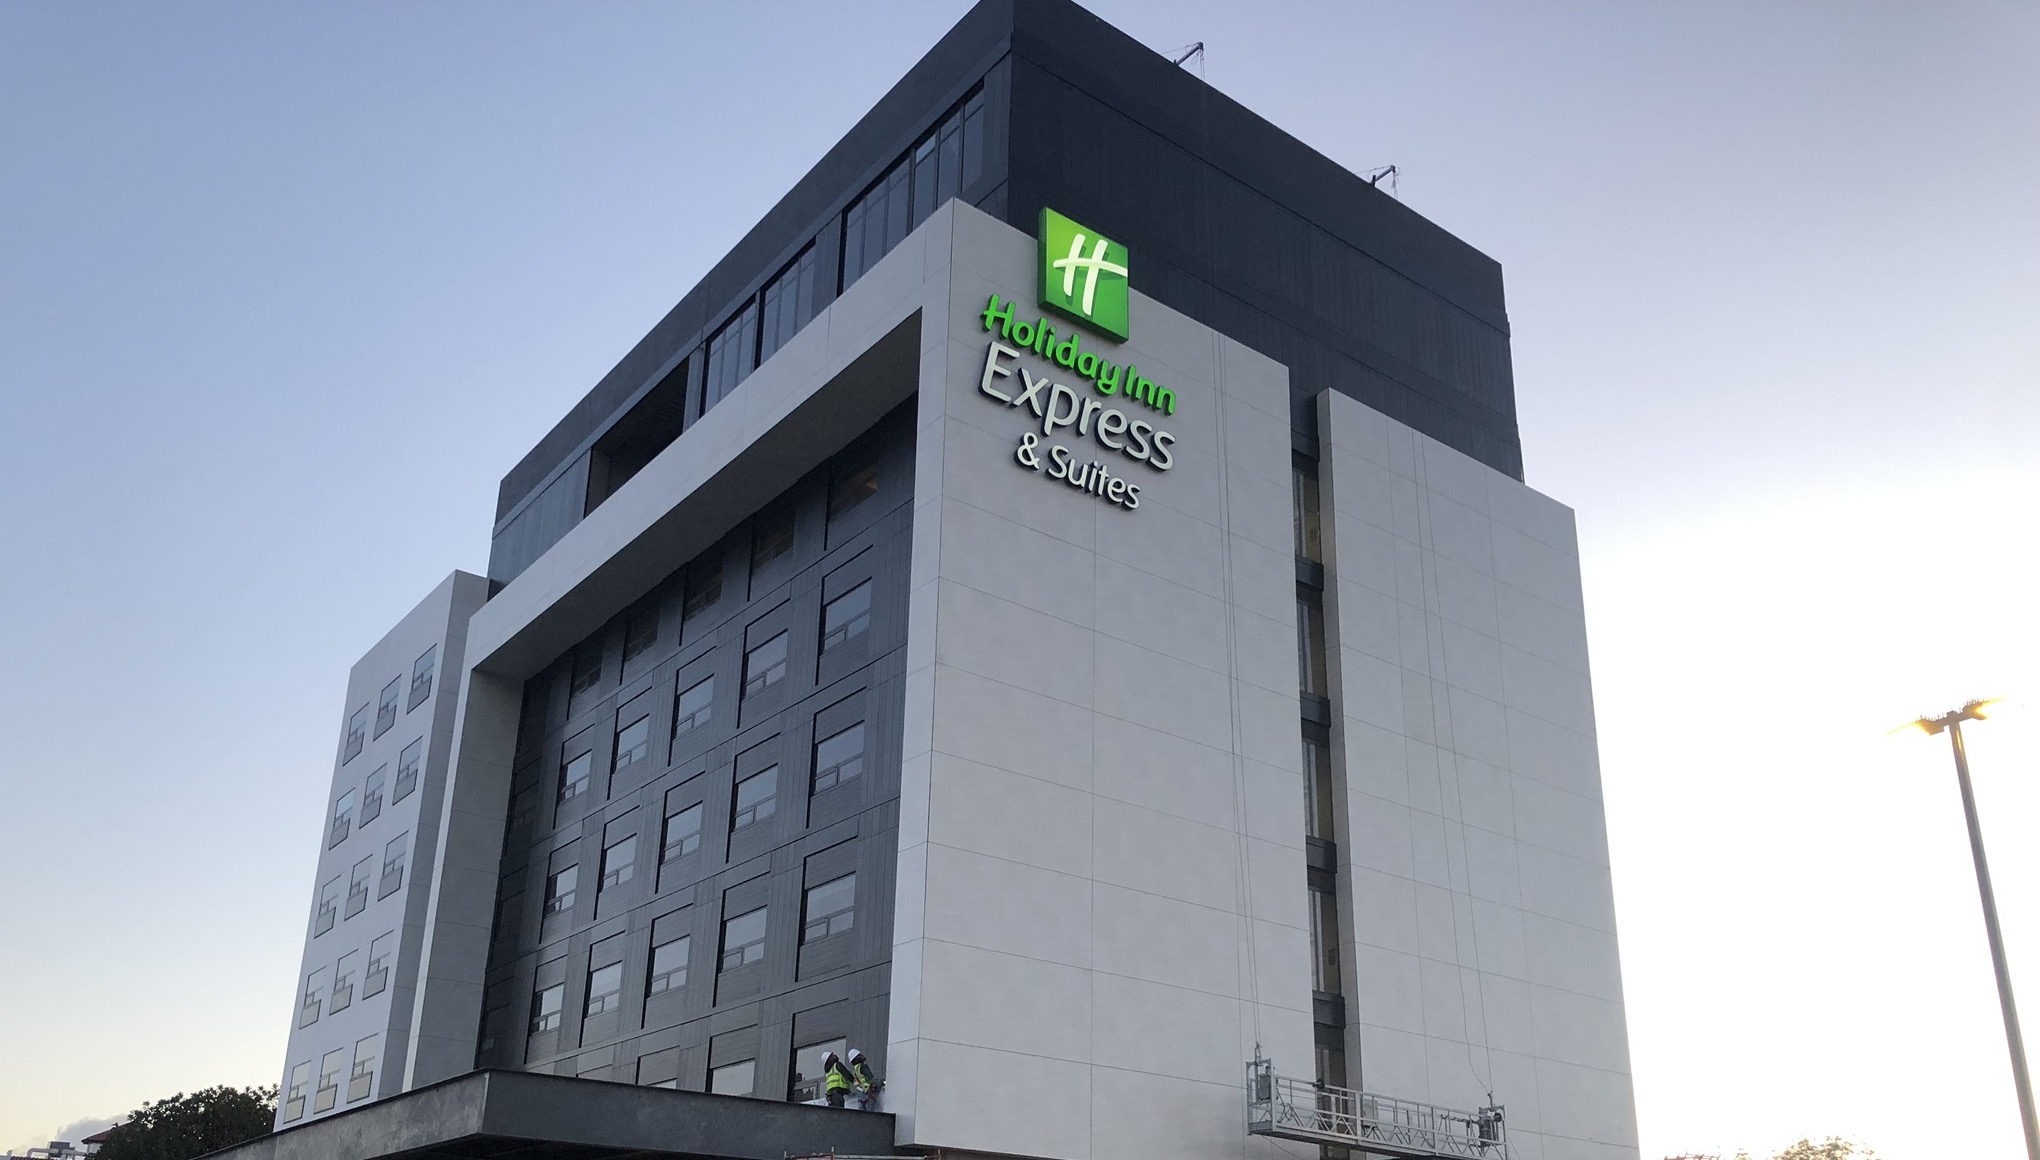 Holiday Inn Express & Suites 2019-2